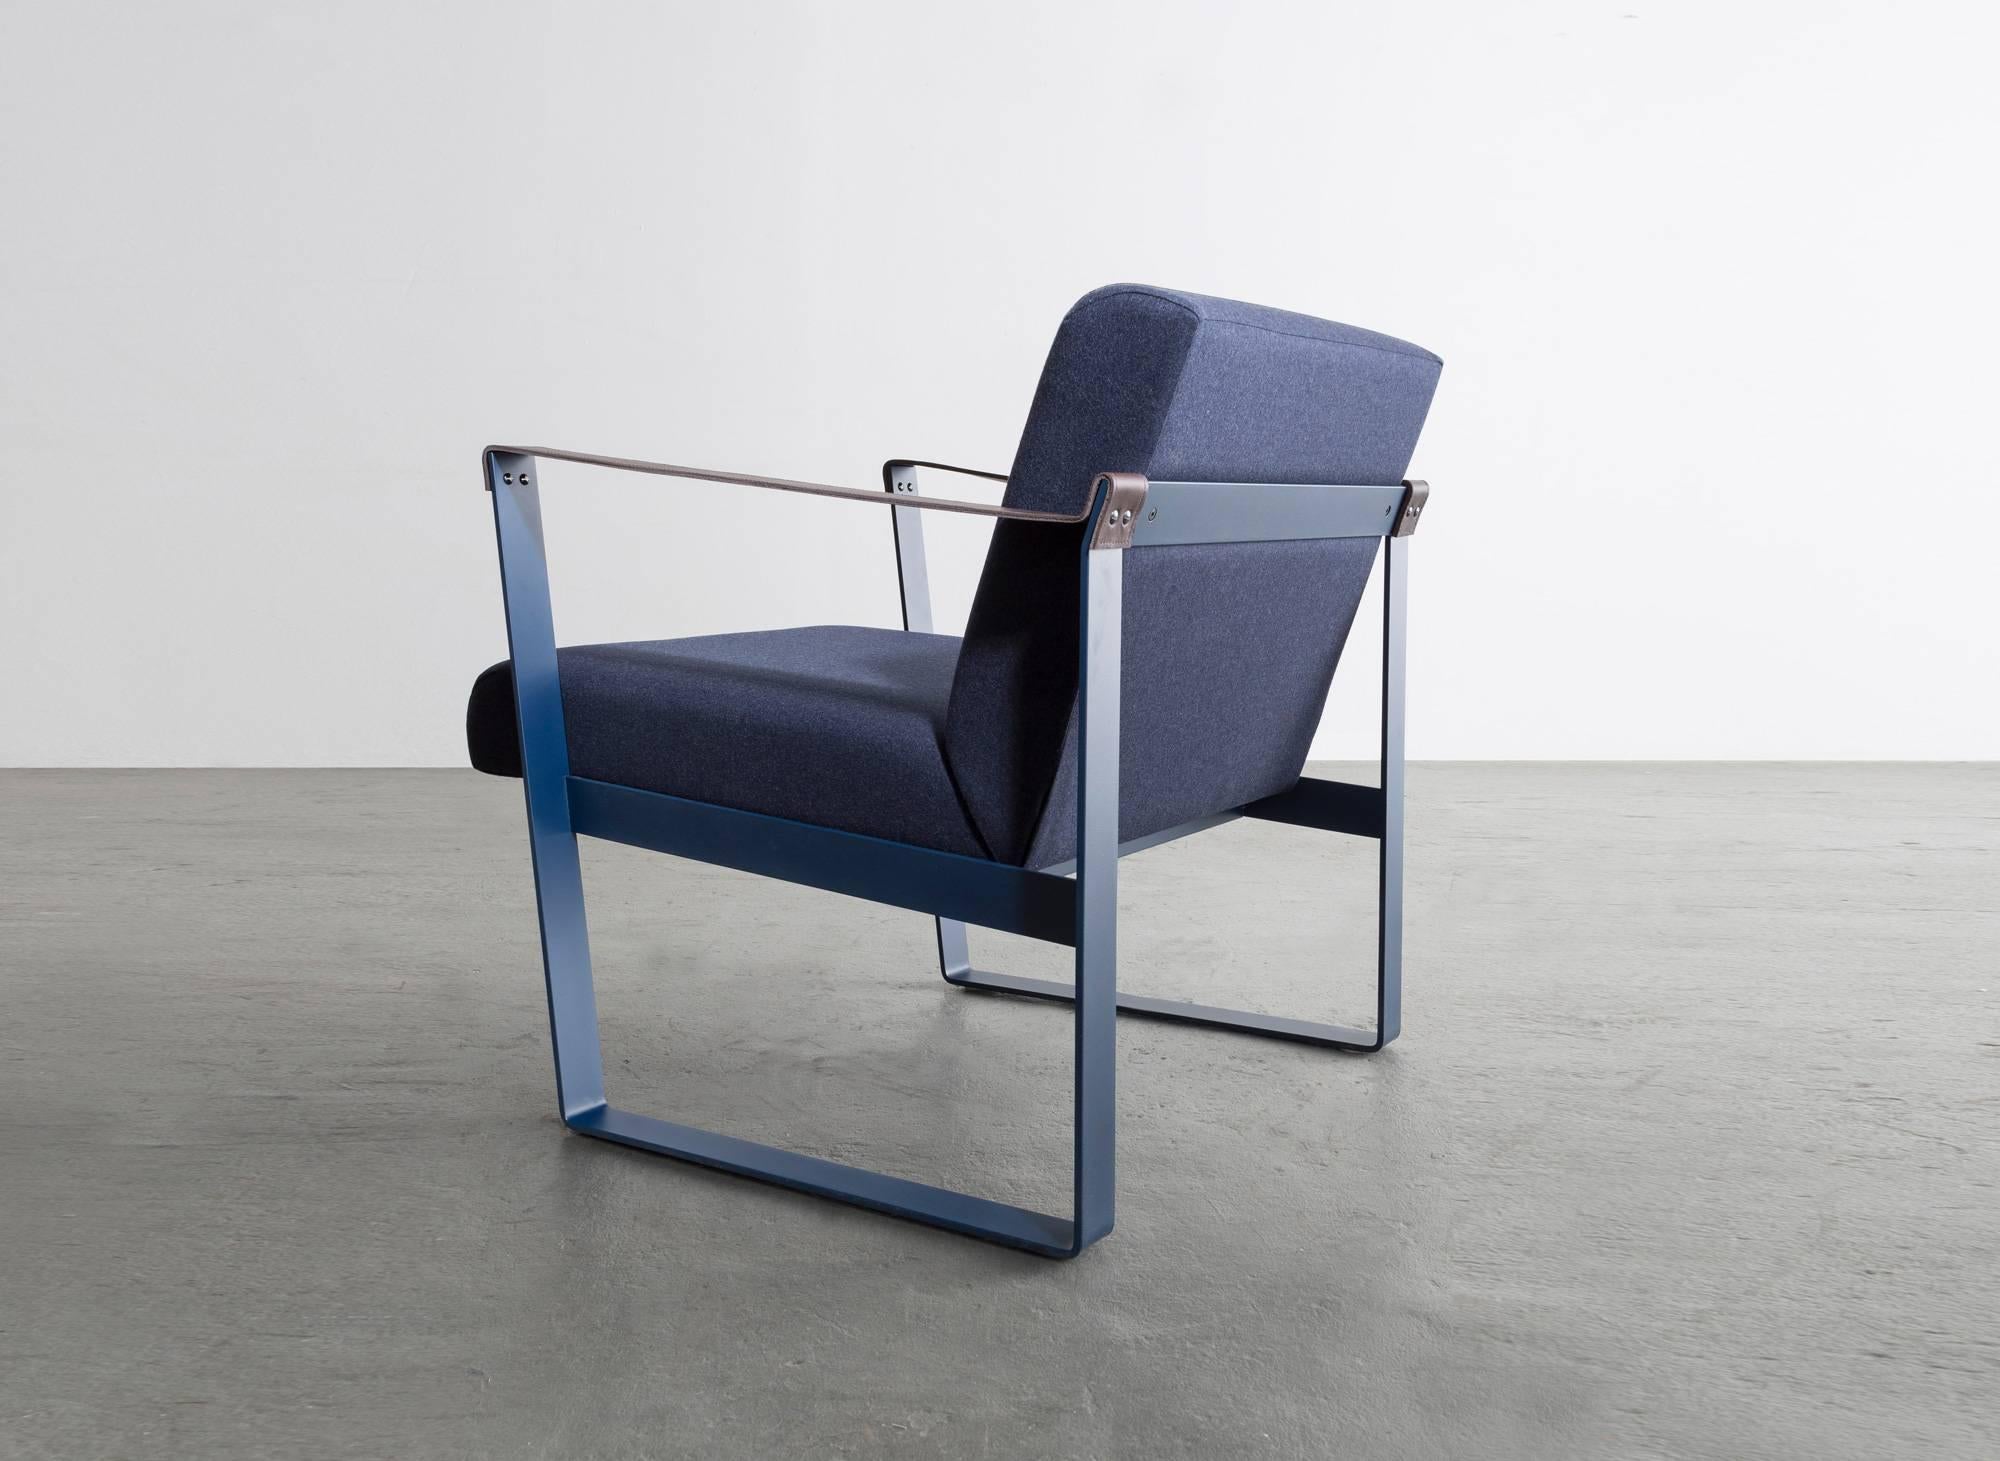 The Strap lounge chair is a refining composition in materials with three distinct tactile qualities. 
 
Powder coated frame shown in blue and available in standard RAL colors.
Cotton upholstery shown in navy also available in COM or COL.
 